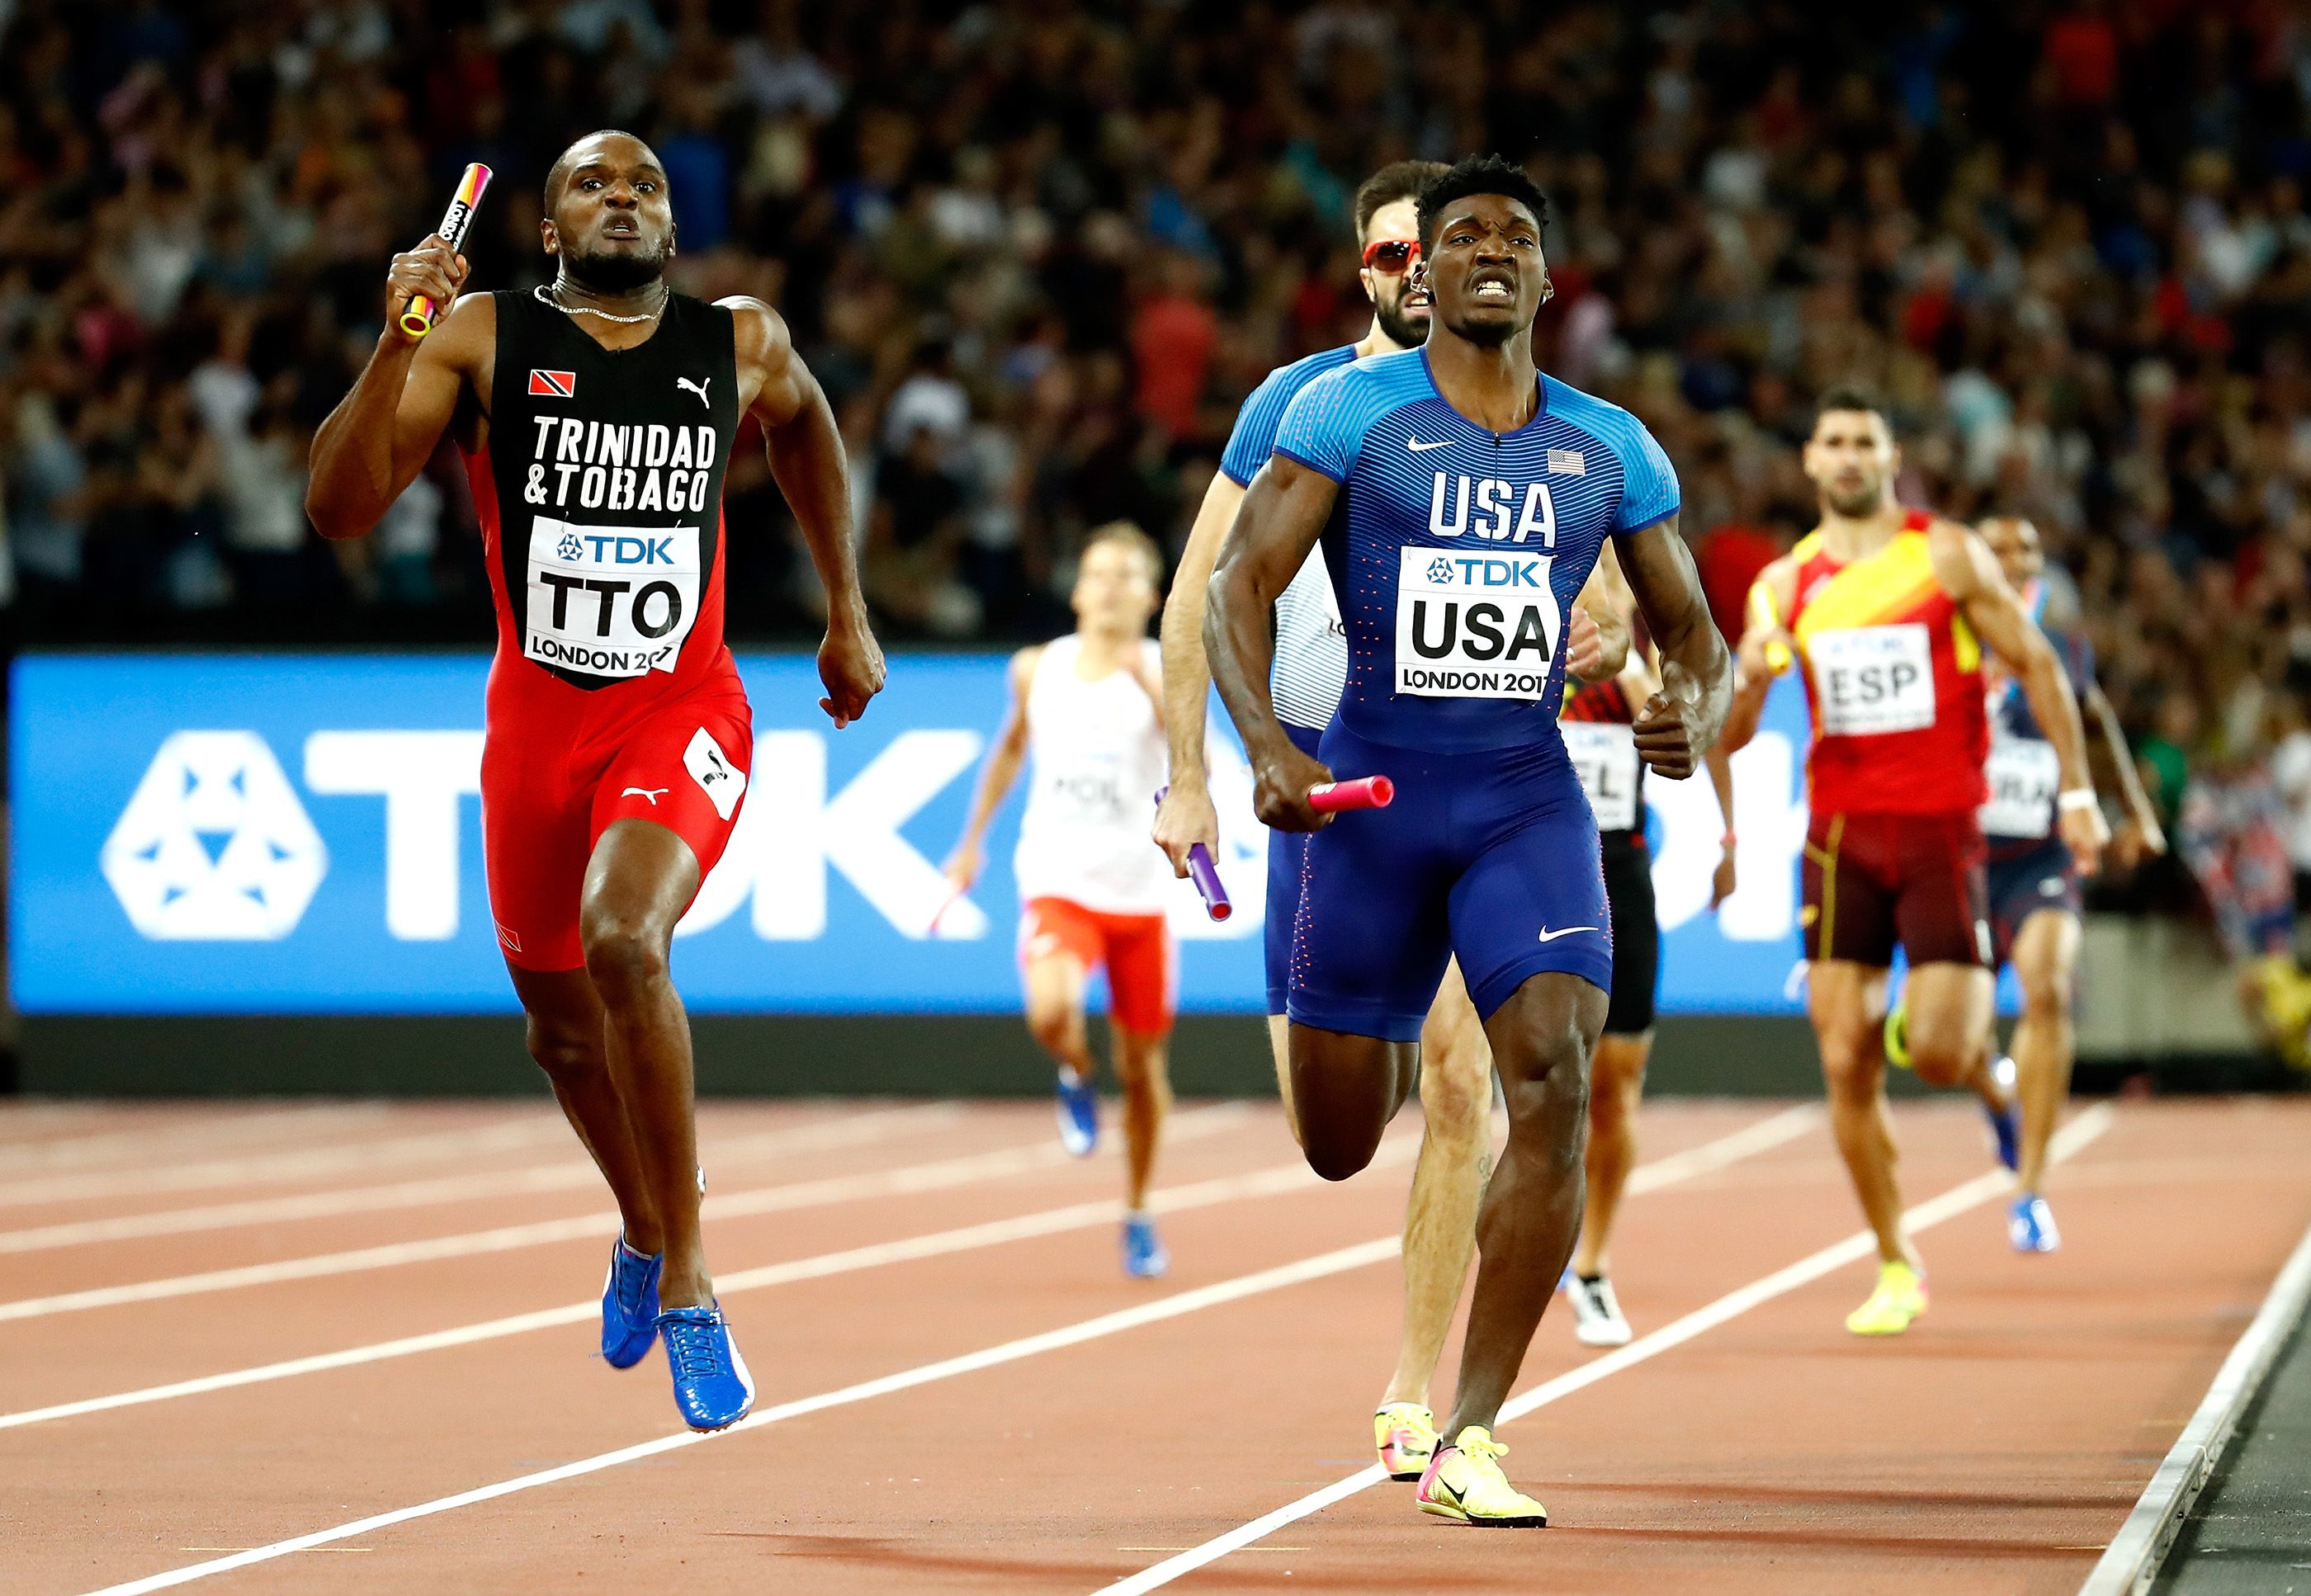 Lalonde Gordon and Fred Kerley fight for the finish in the men's 4x400m final in London